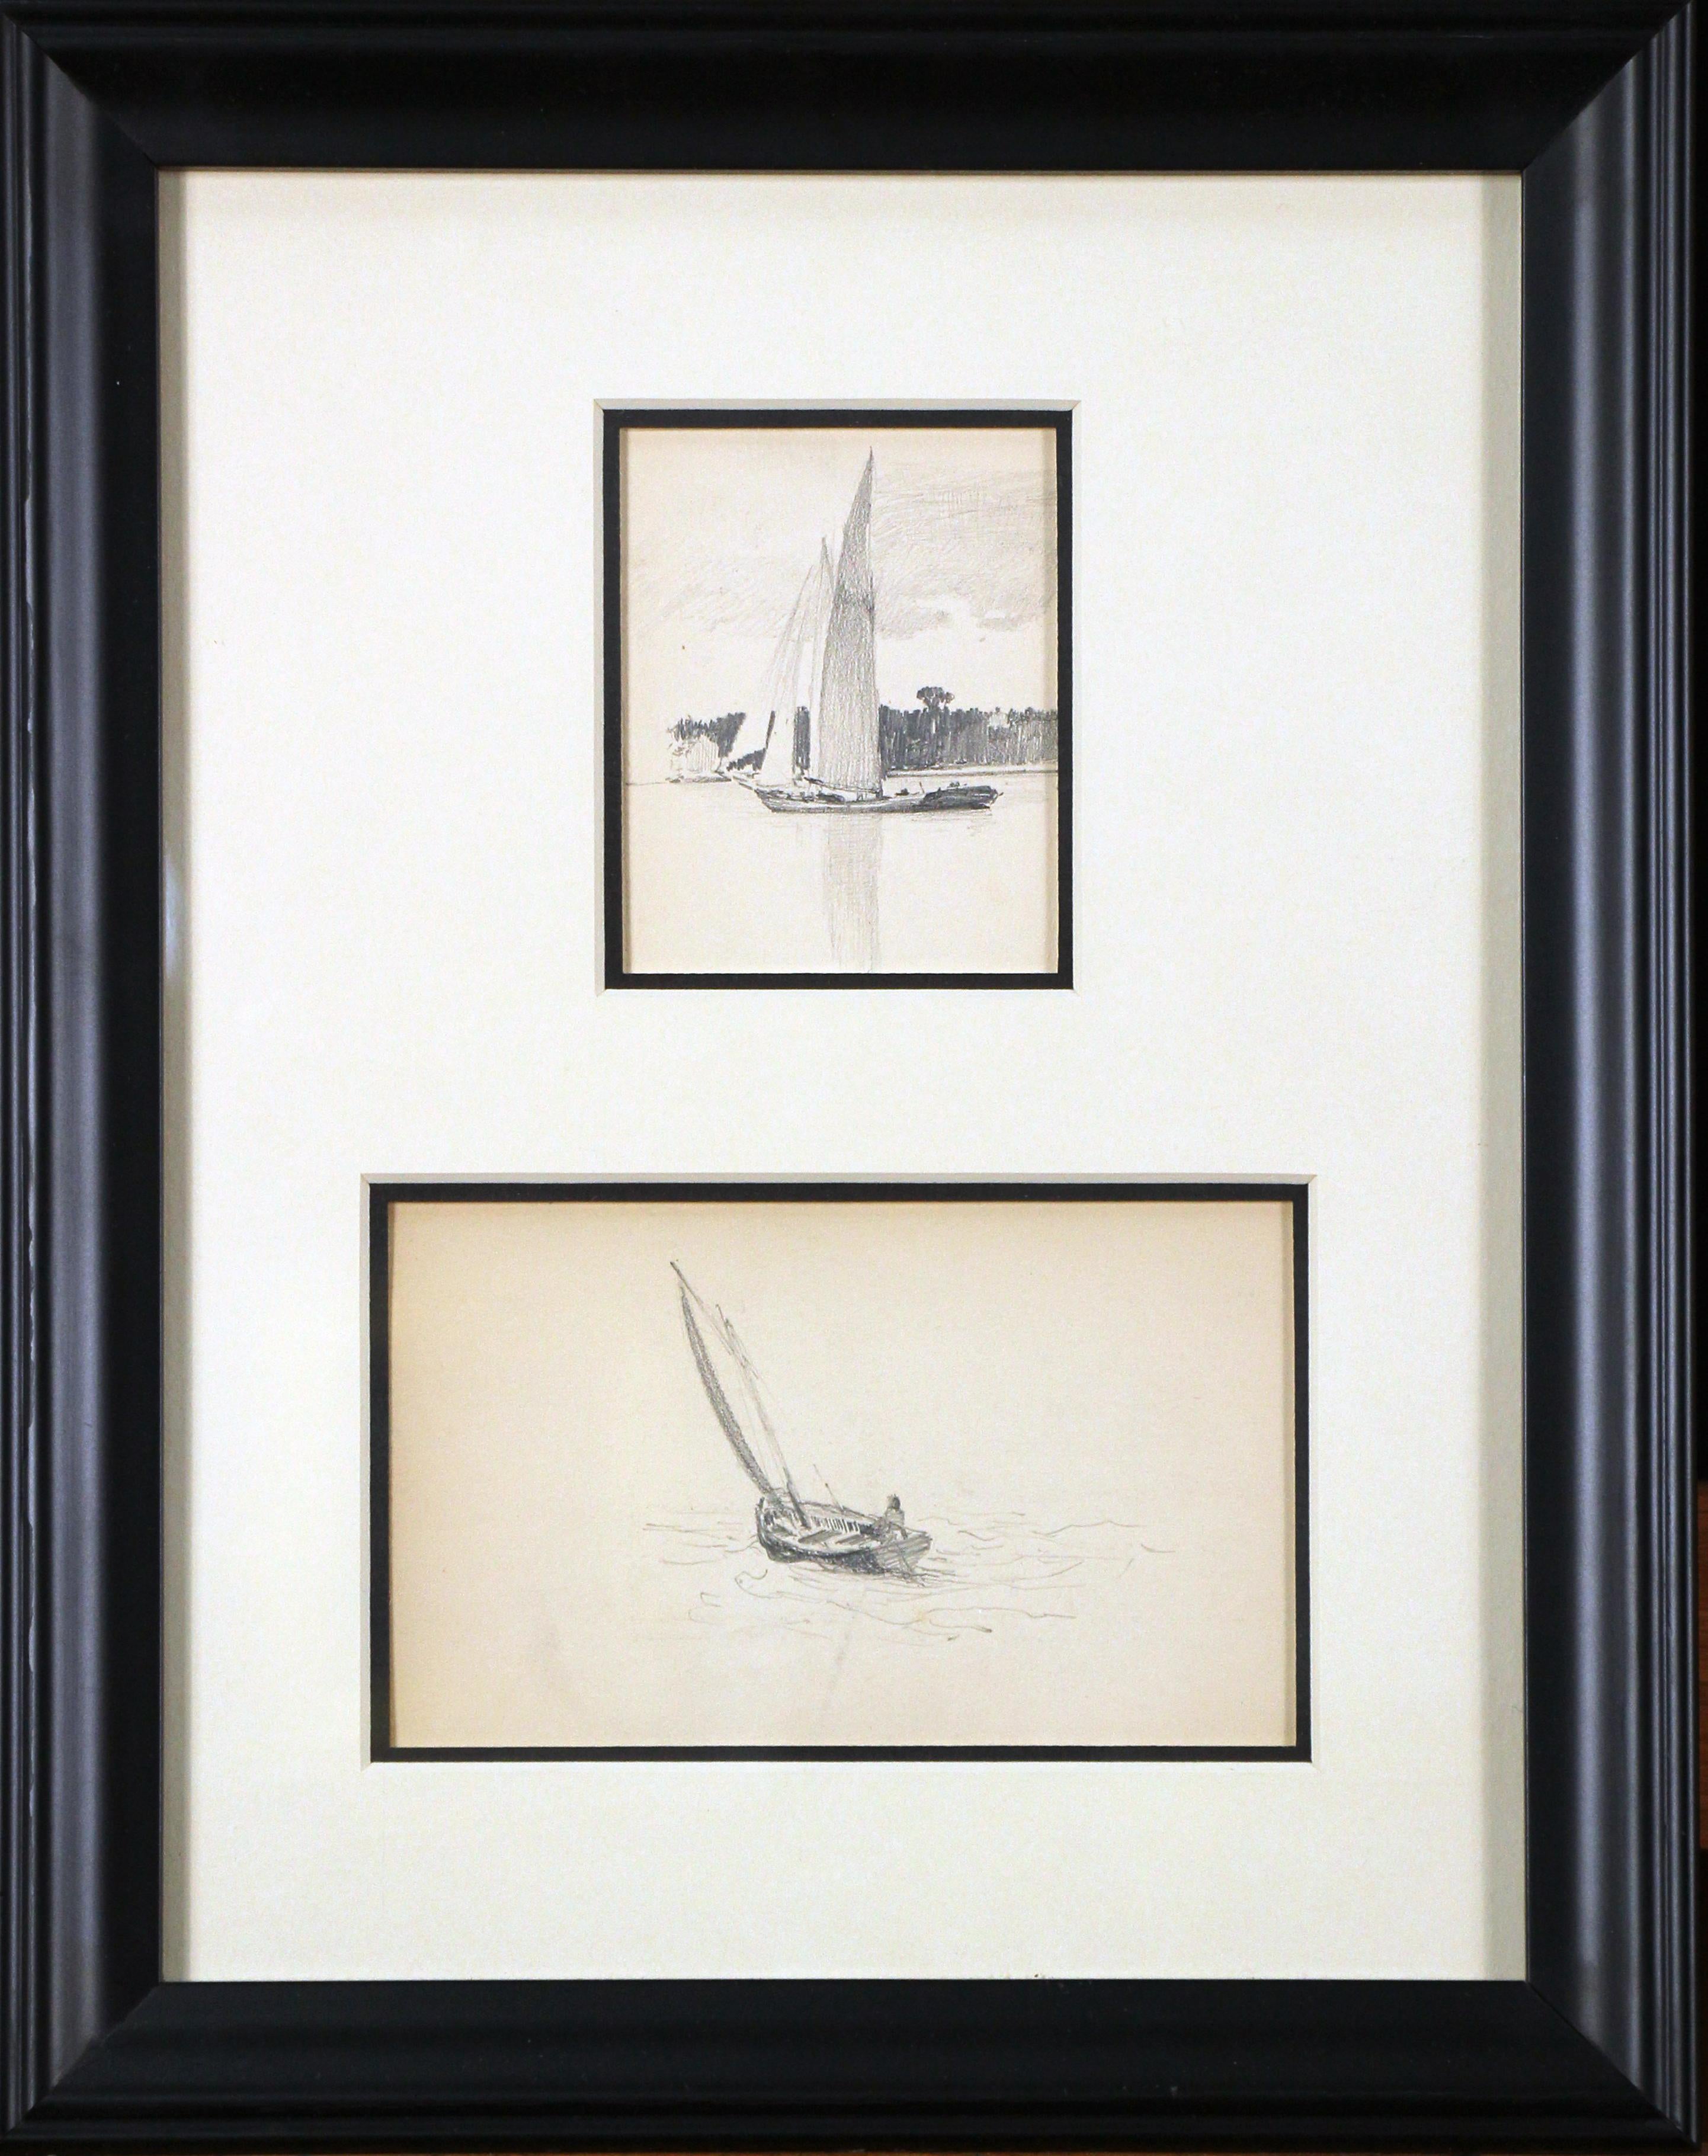 Two Sailboats, American Impressionist, Pencil Drawings on Paper, 1899